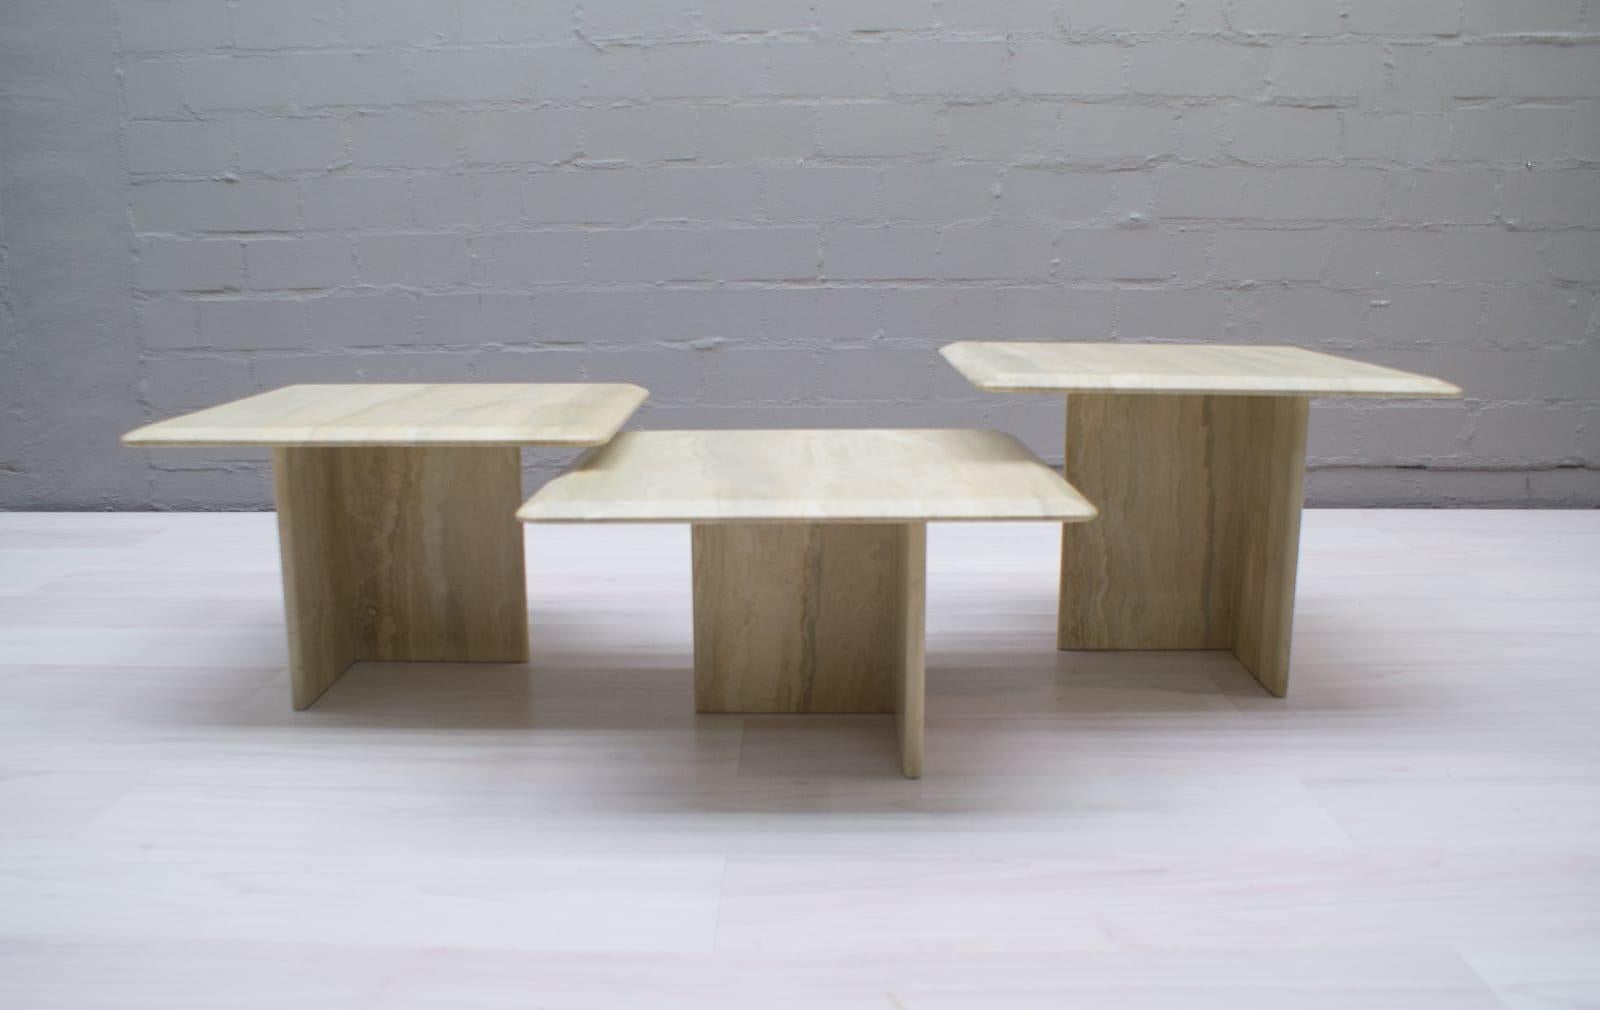 Set of square travertine coffee tables in very good condition.

These coffee tables are made from solid travertine.

They have different heights so they can be combined in many different ways.

Measures: Height 32cm / 12.59